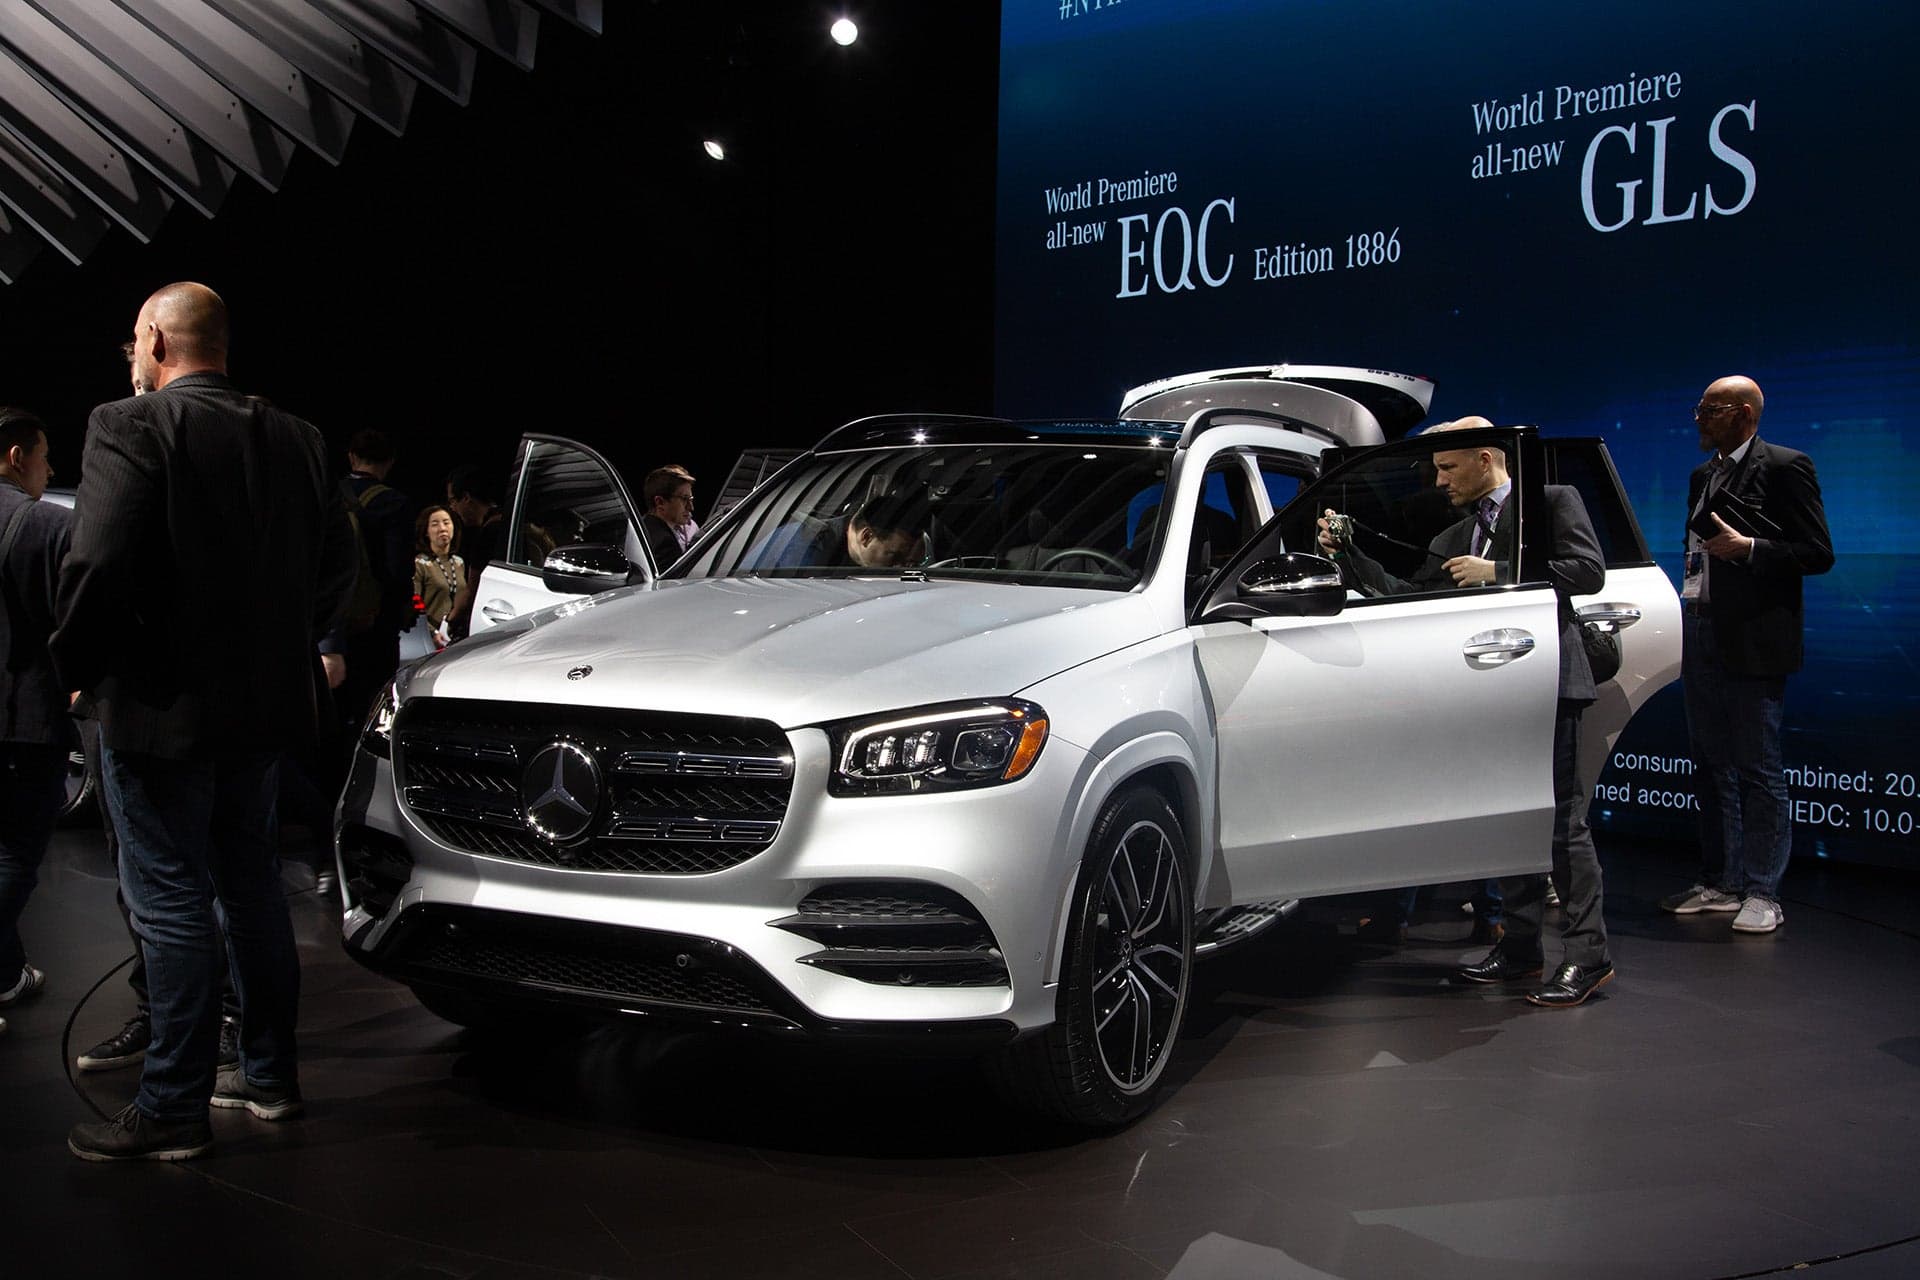 2020 Mercedes-Benz GLS SUV: Hybrid Power and Flagship Tech for Your Upper-Class Family